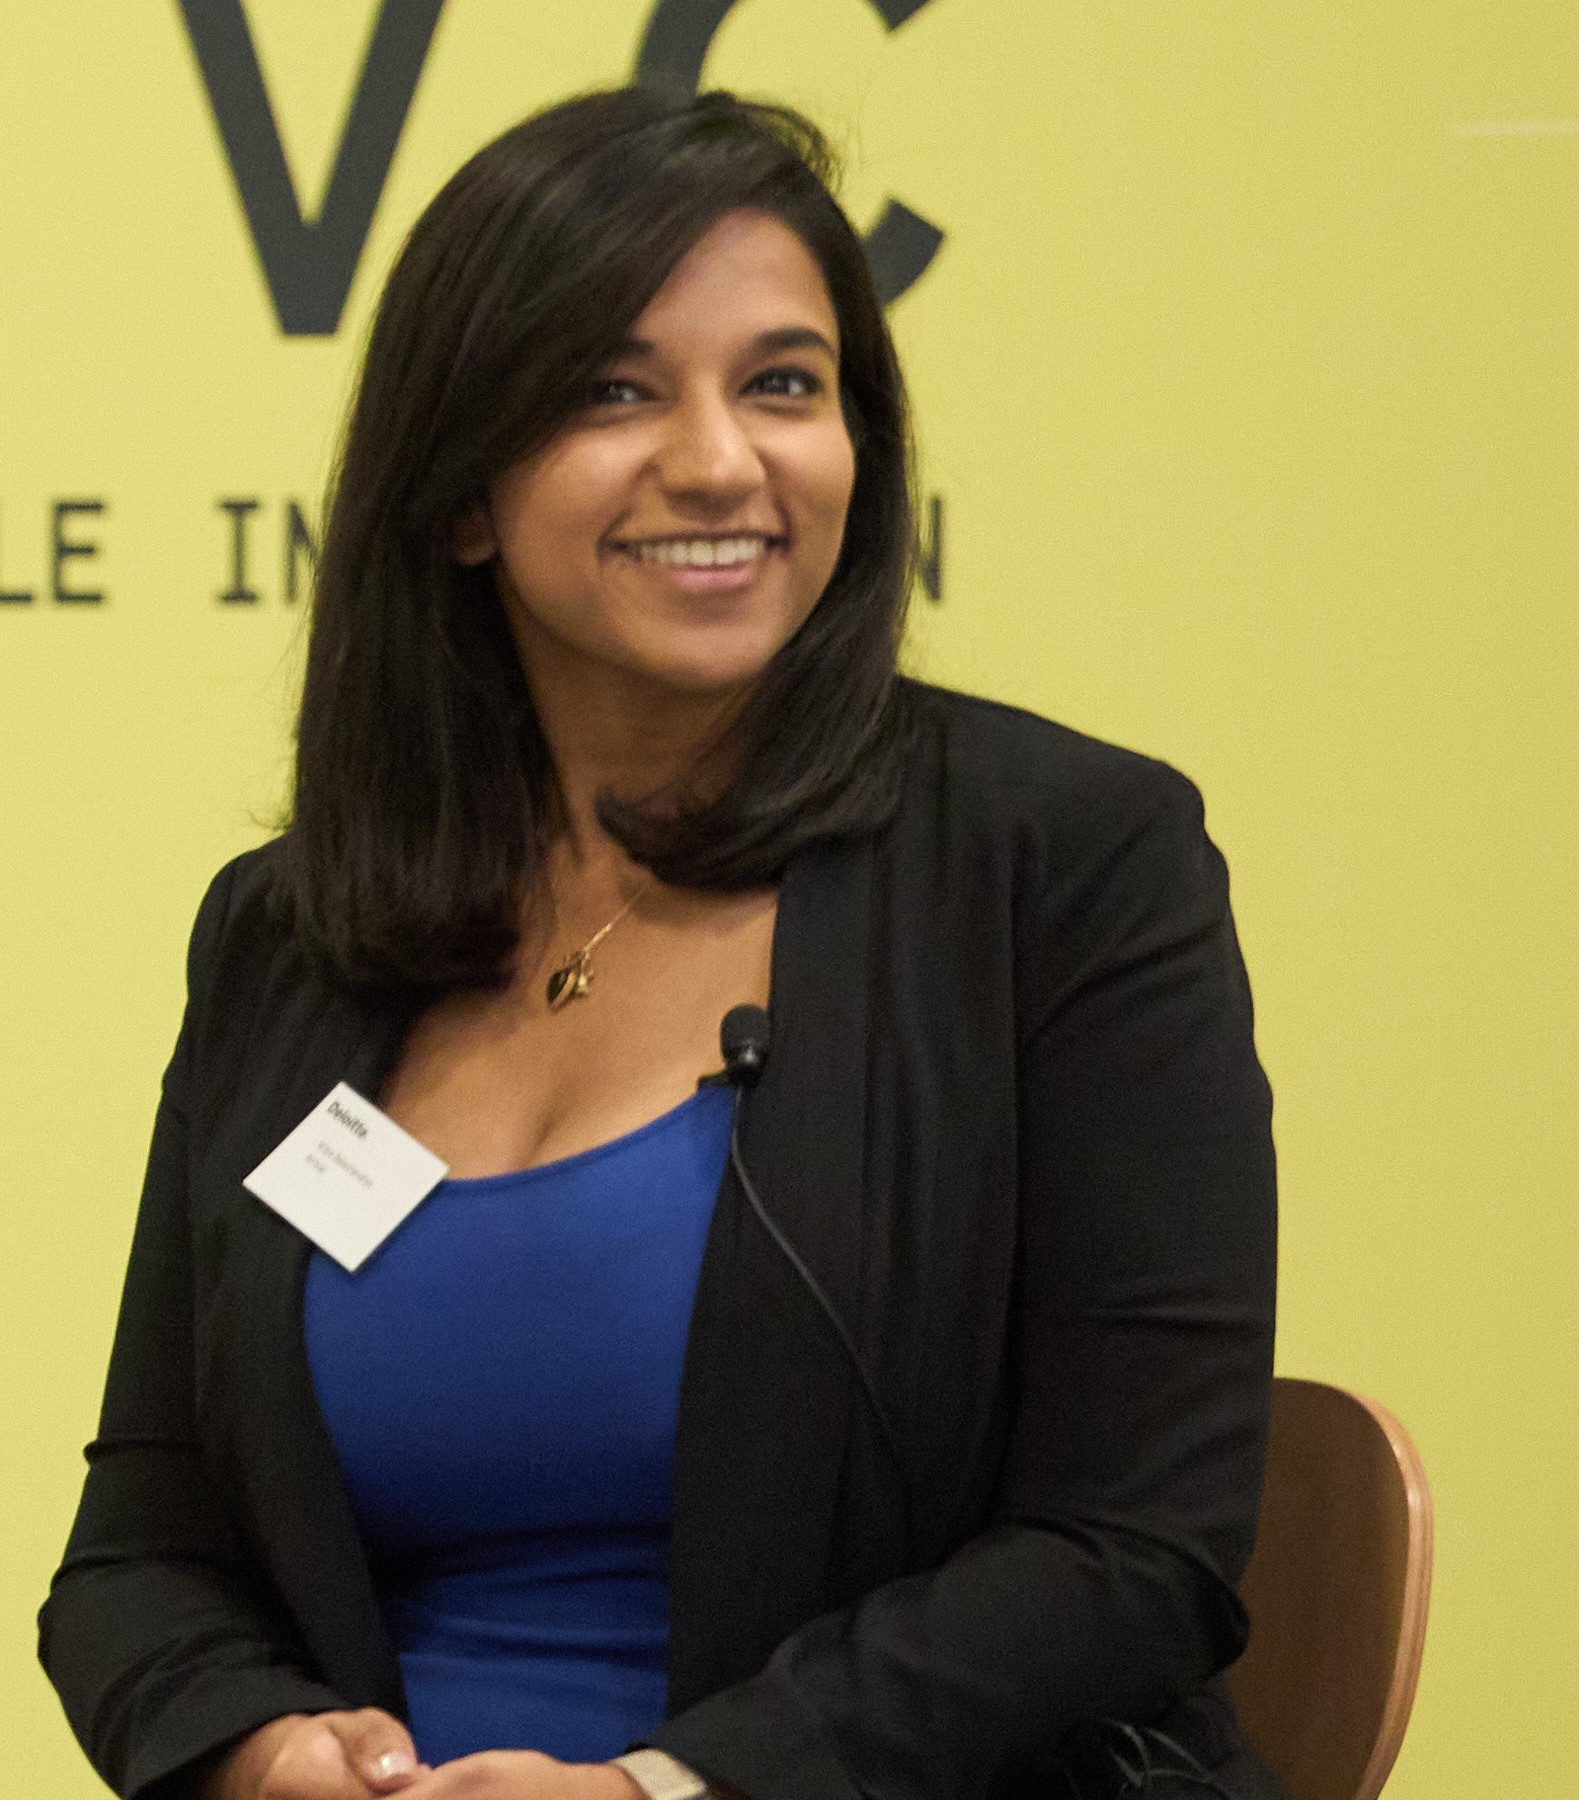 Image of Kripa Balachandran smiling in front of a yellow background